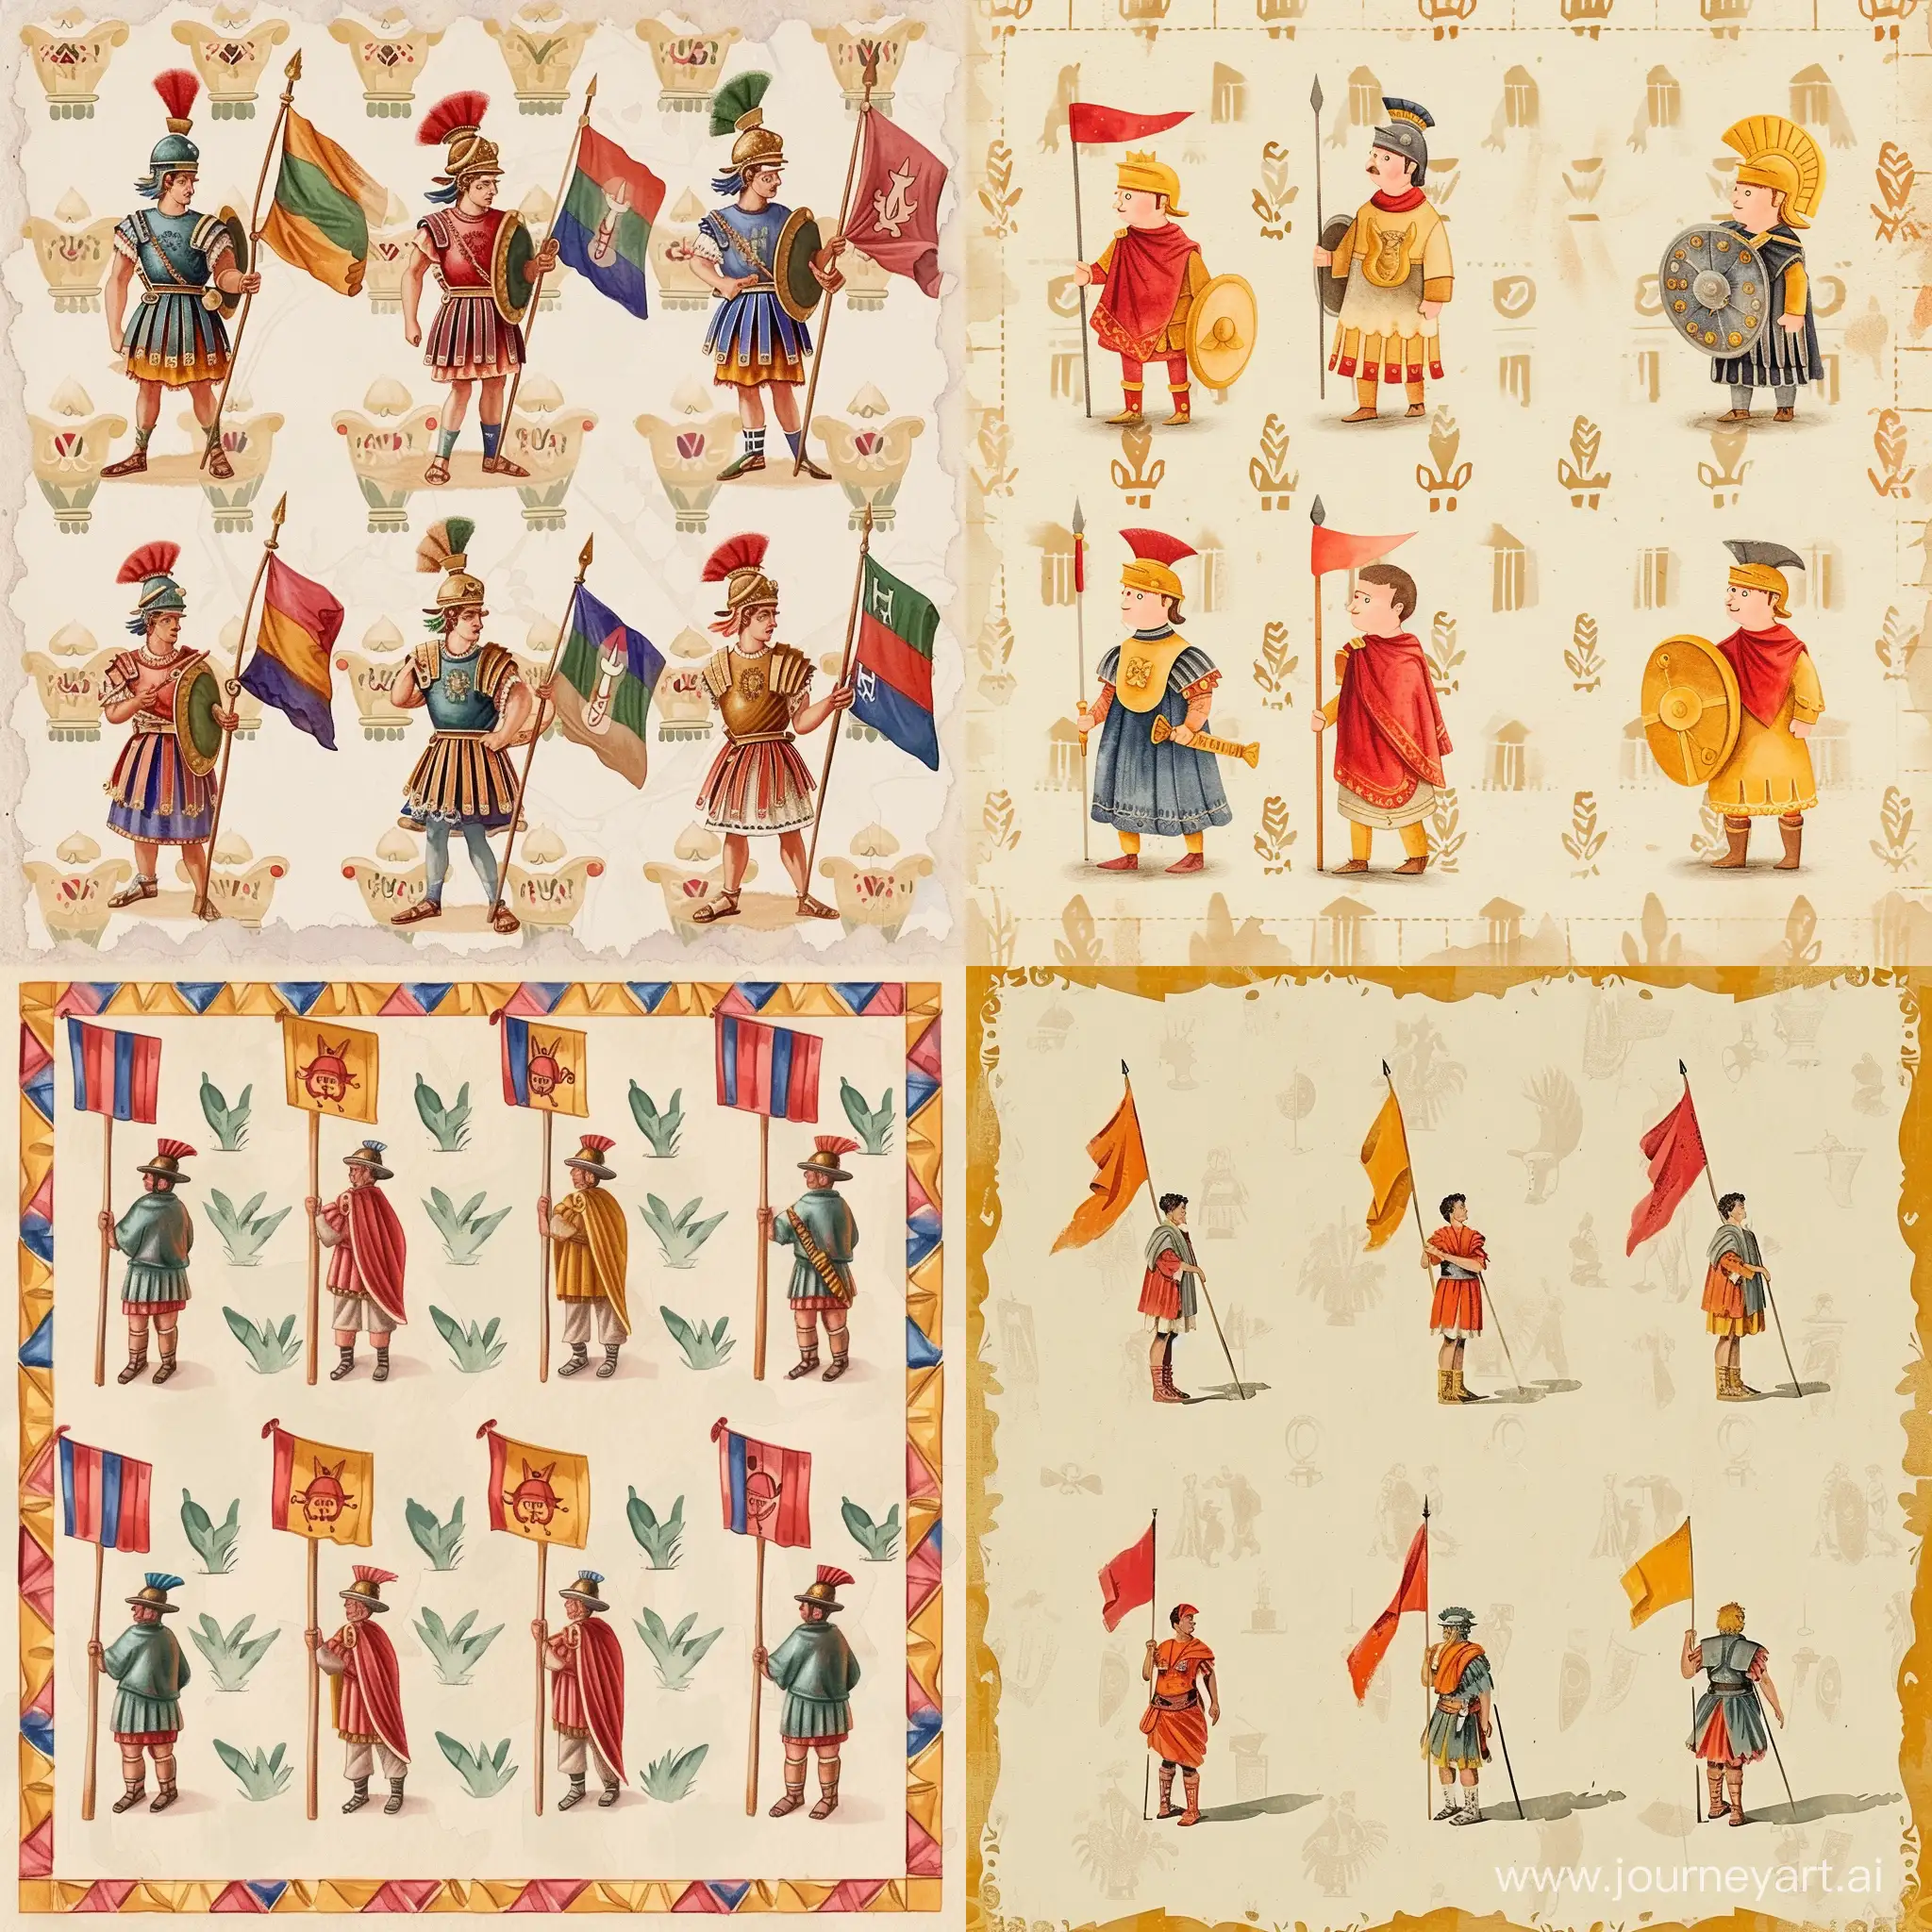 Ancient-RomeInspired-Watercolor-Illustration-with-Six-Figures-and-Flags